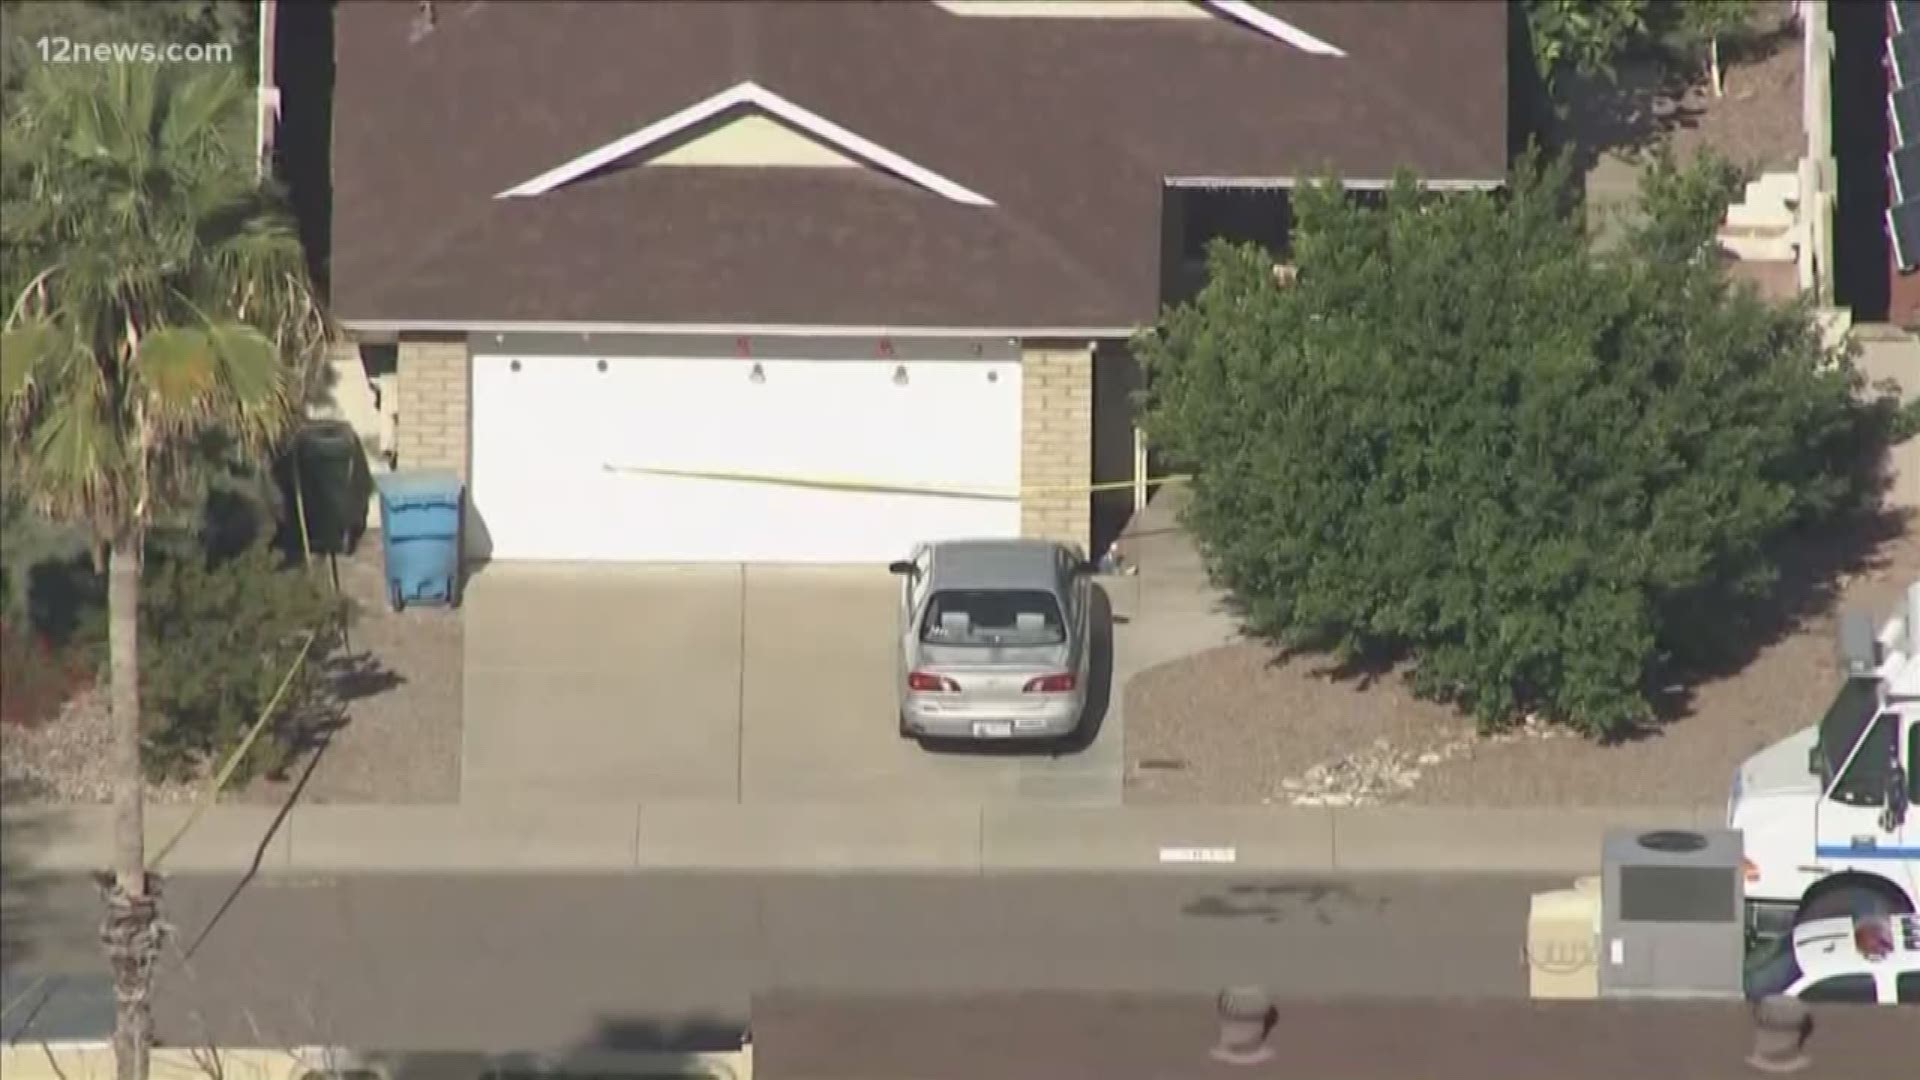 Police found a woman dead inside her North Phoenix home, and her husband in the prime suspect. Someone from inside the home called 911 and did not respond when a dispatcher answered. Police responded to the home, that's when they found the women inside dead.